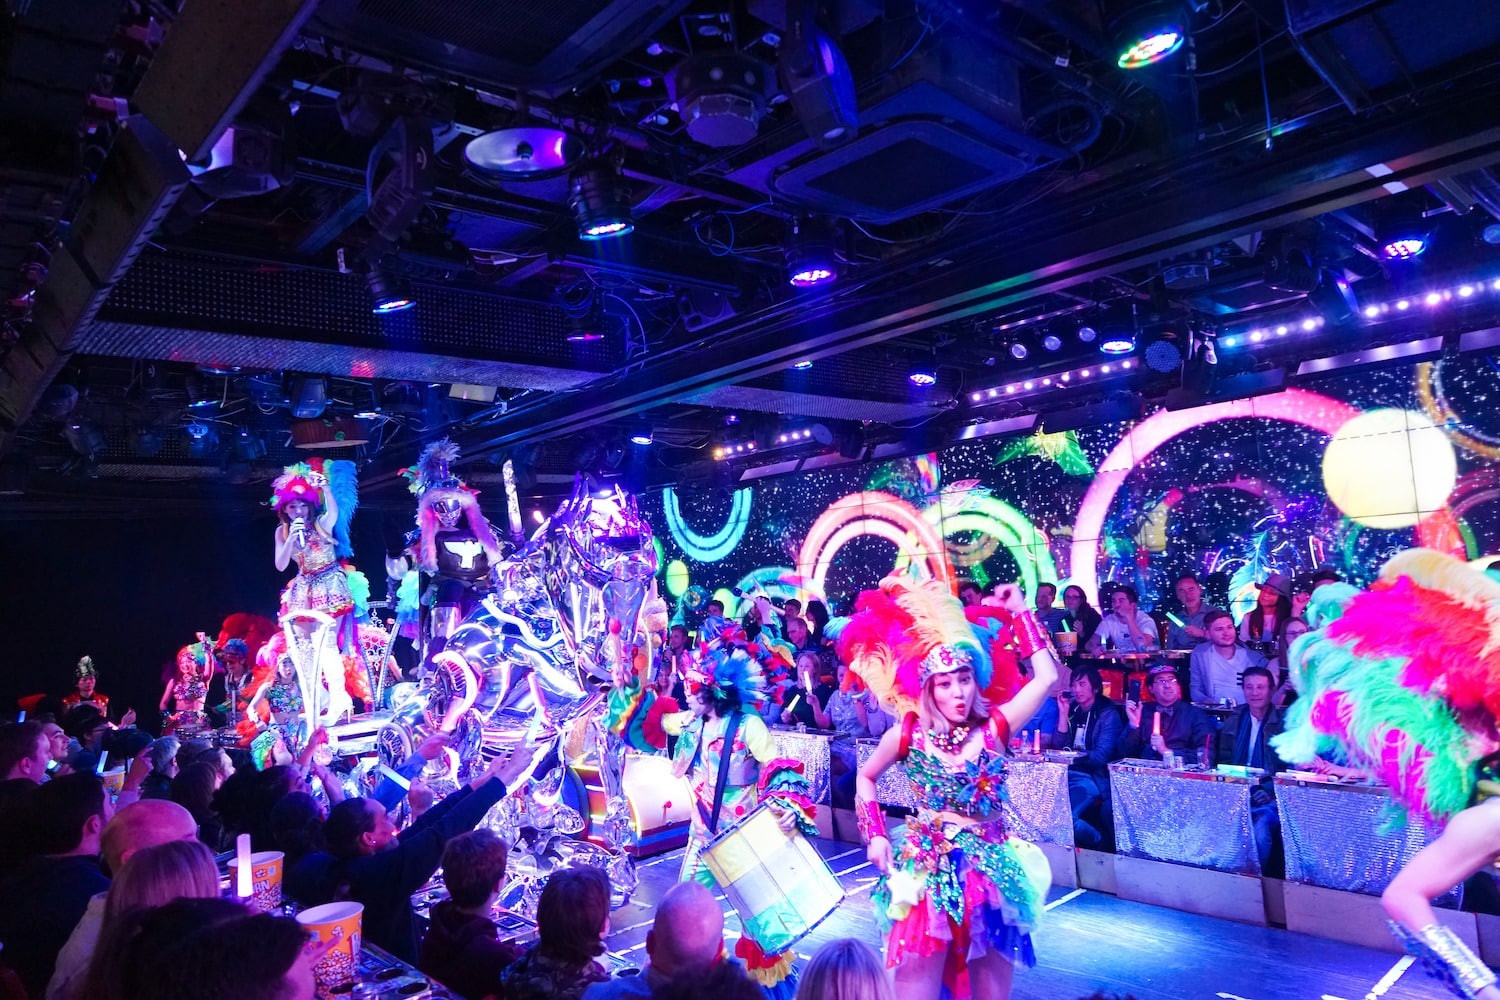 Why You Absolutely Need To Go To The Crazy Robot Restaurant In Tokyo